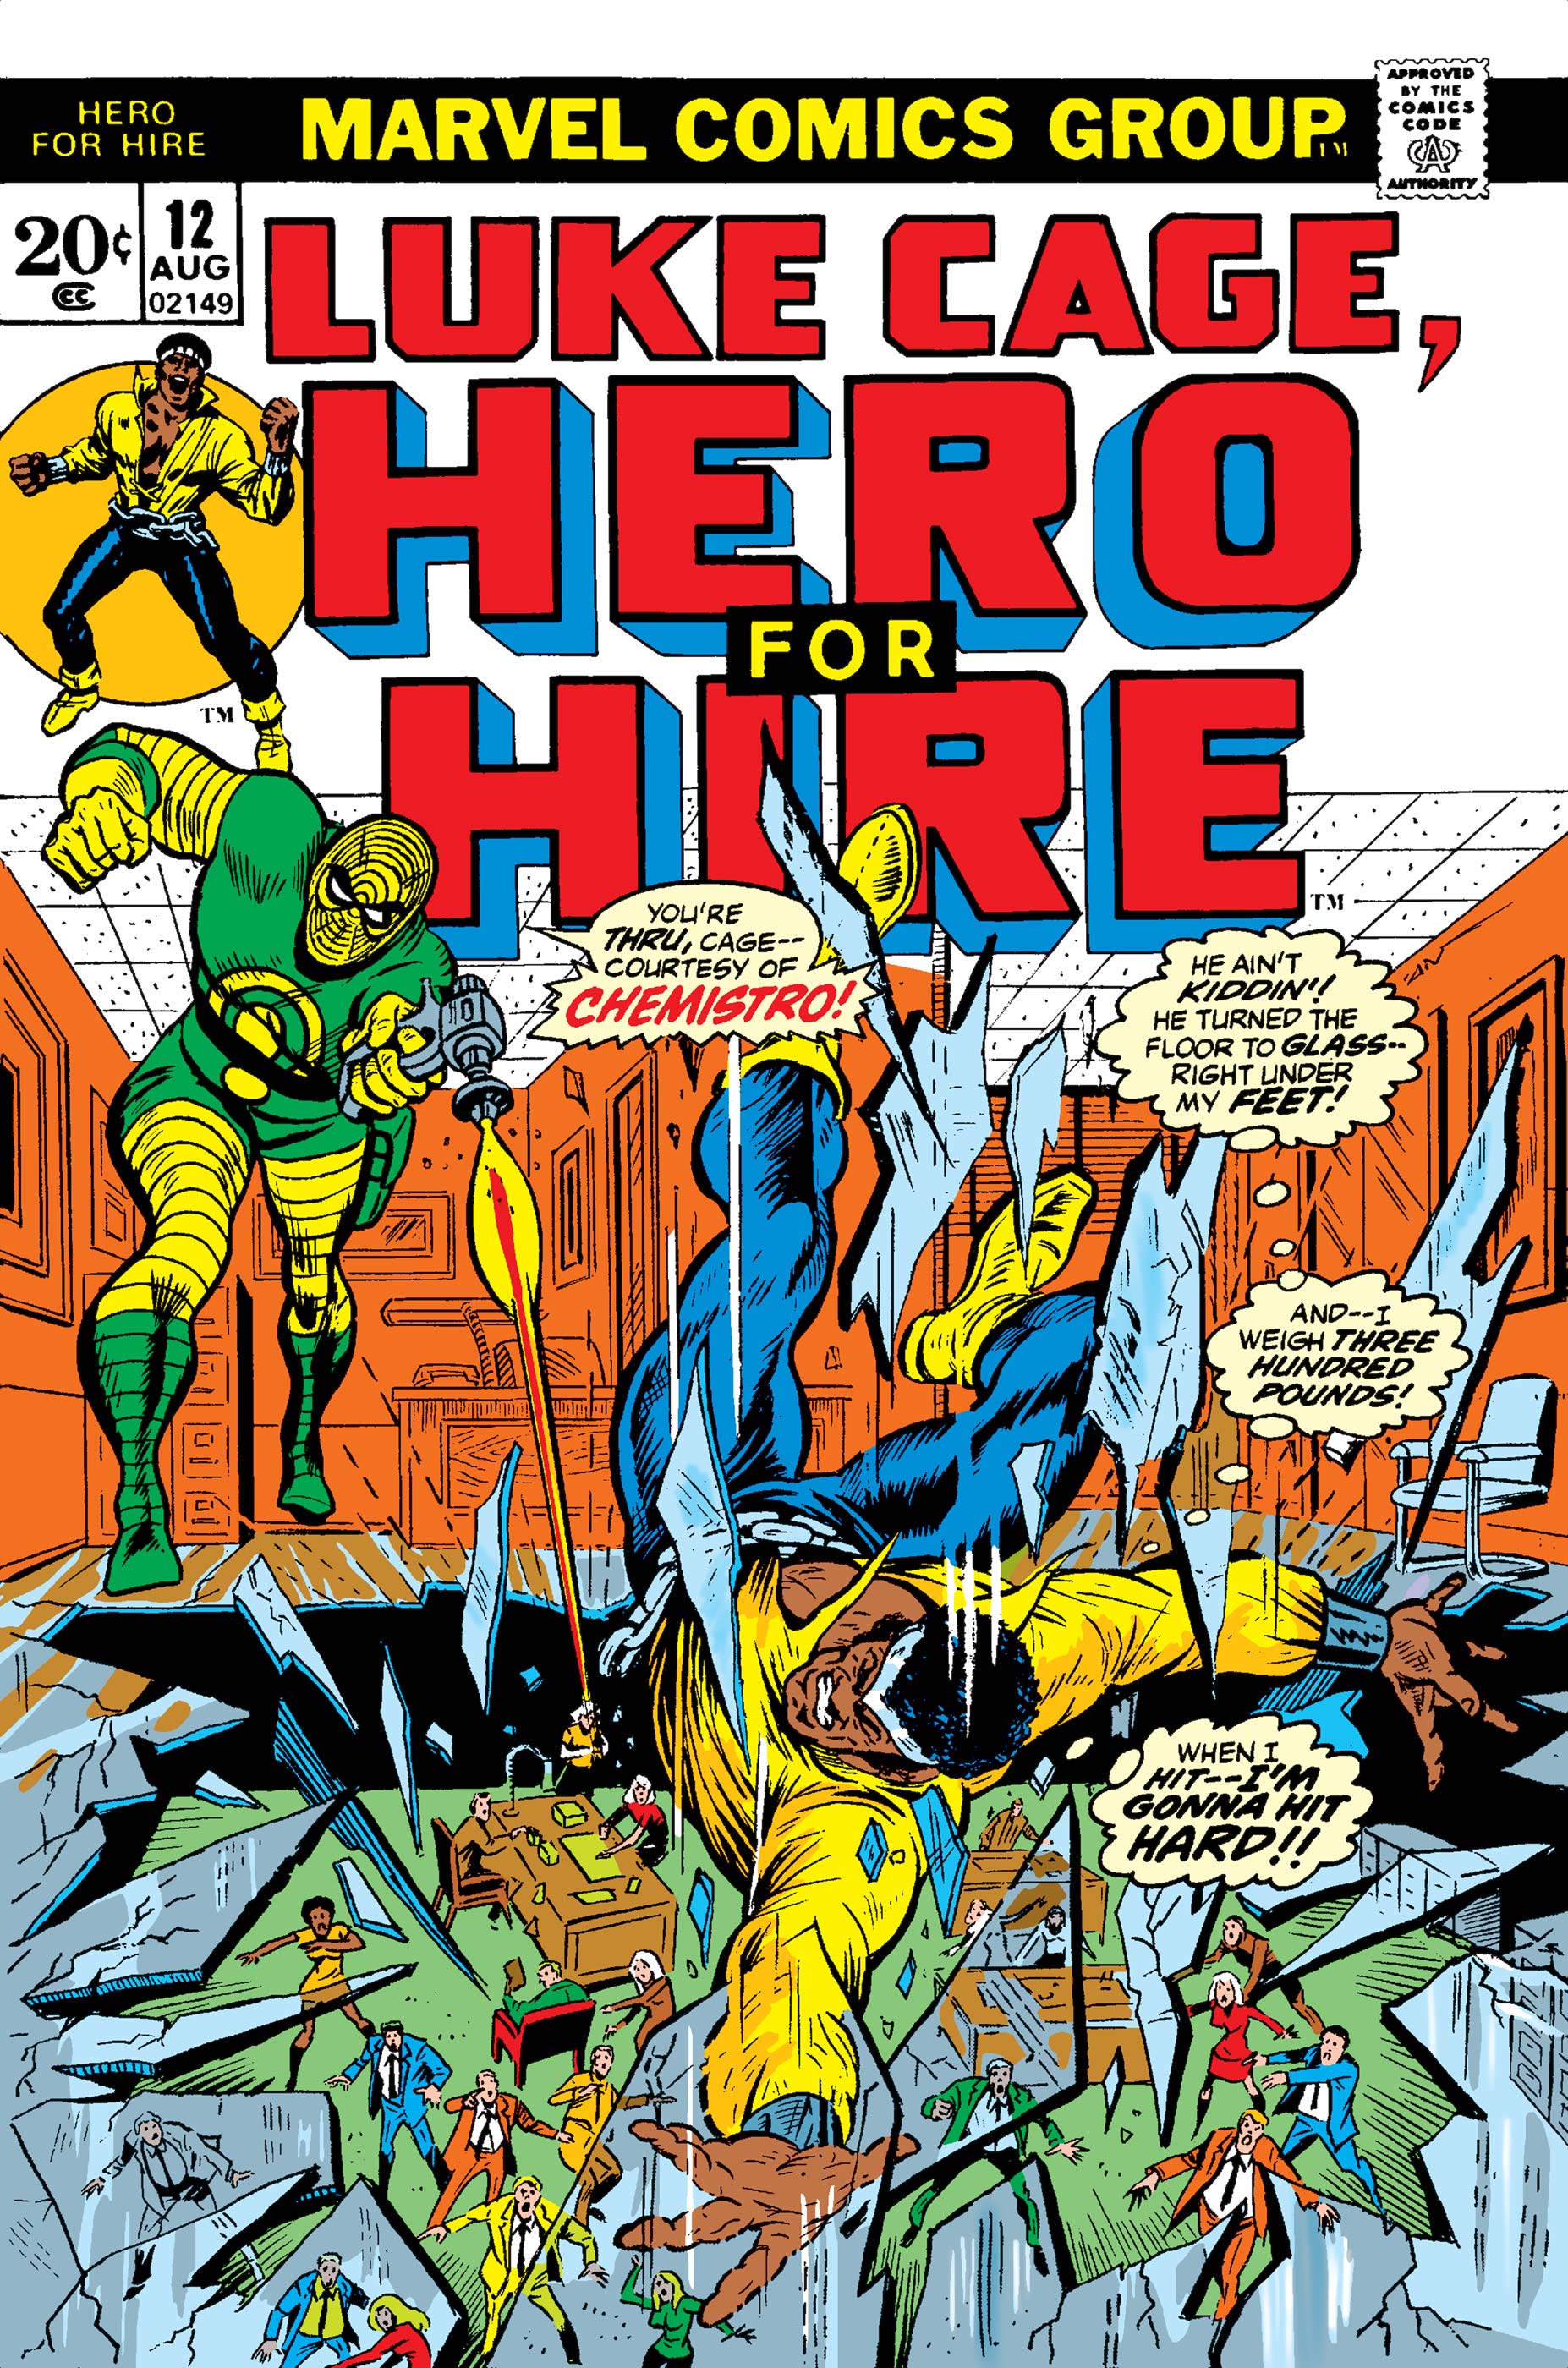 Hero for Hire (1972) #12